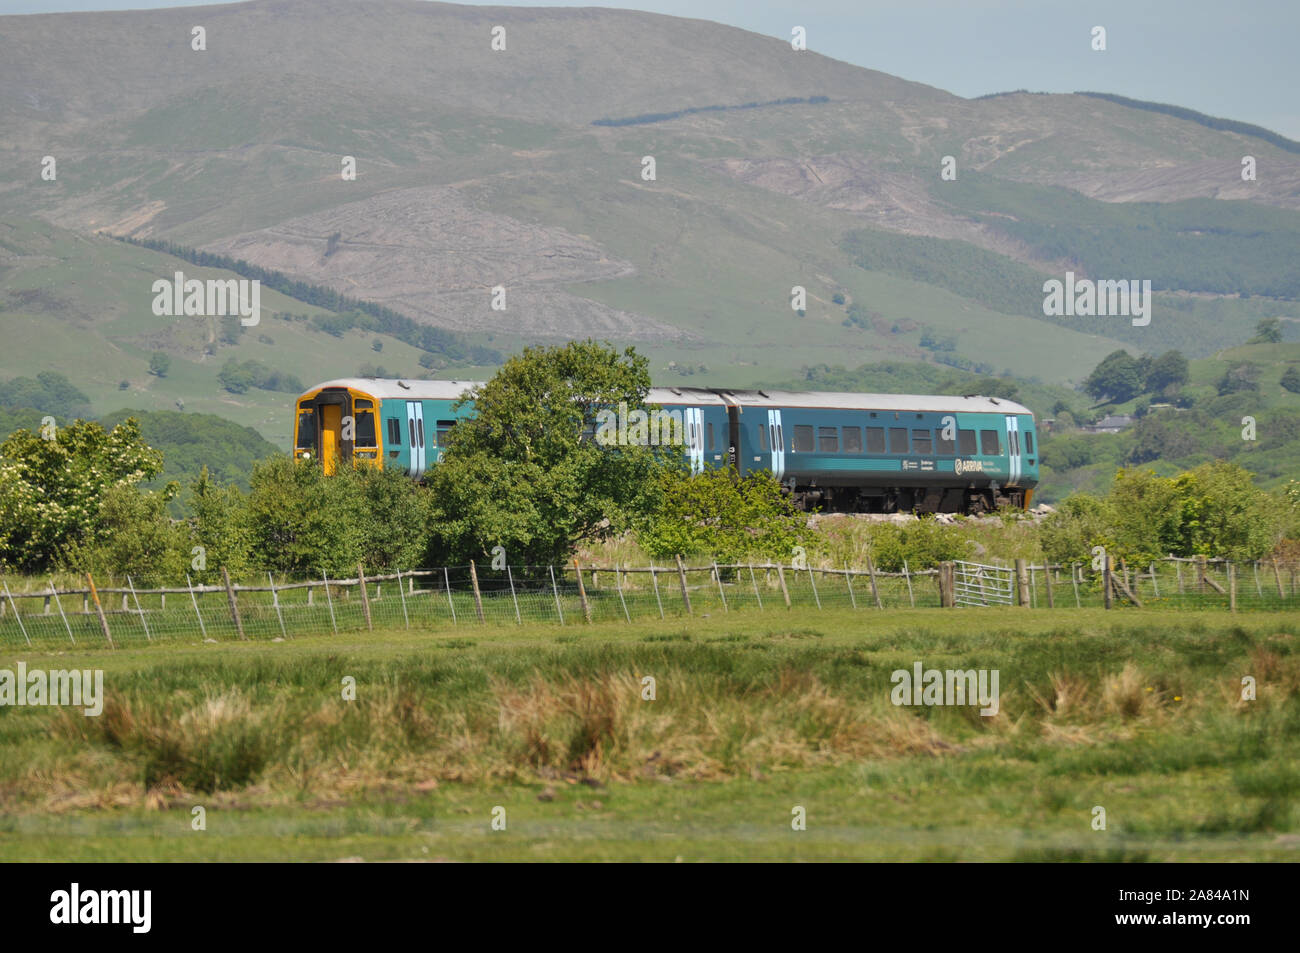 The now defunct Arriva Trains Wales traveling through the Welsh countryside by Borth Wales UK Stock Photo